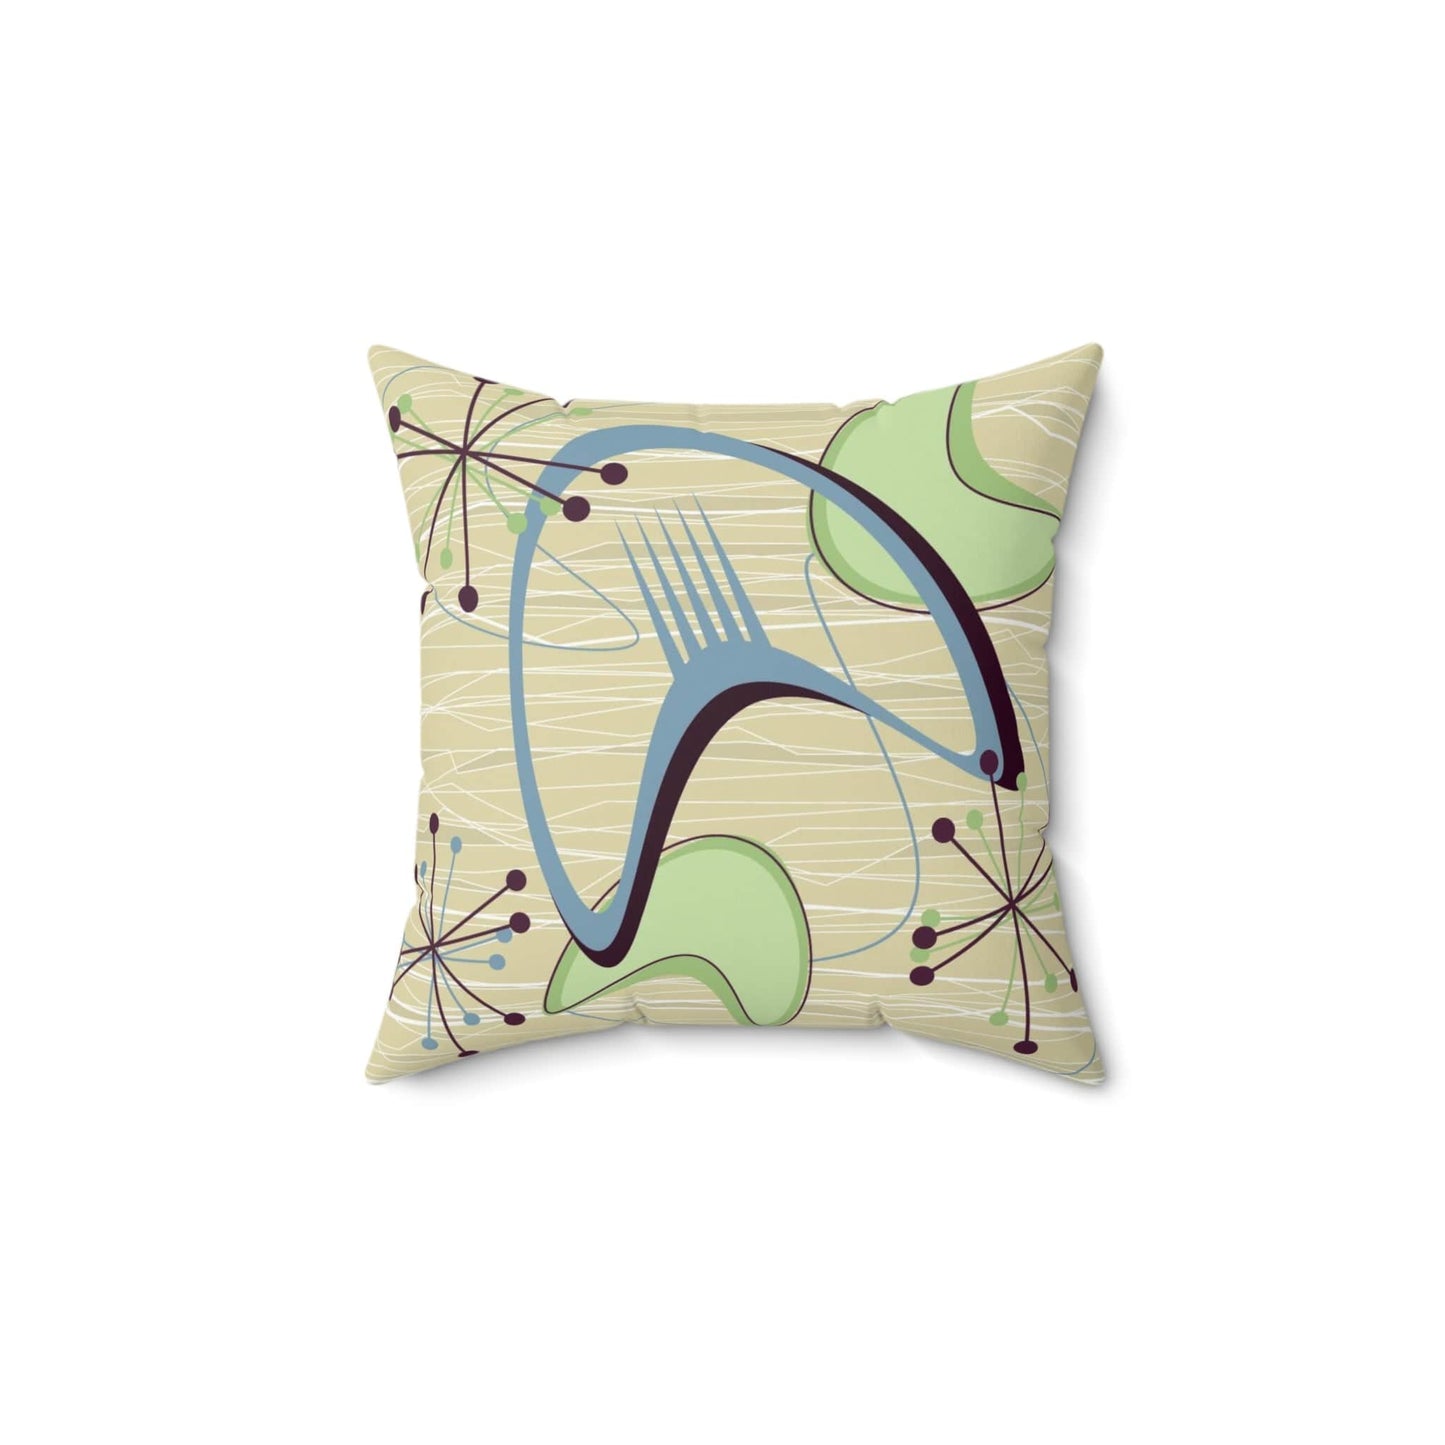 Printify 1950s Atomic Boomerang Mid Century Modern Throw Pillow in Retro Vintage Beige, Blue, Green Geometric Starbursts, MCM Abstract Accent Pillow Home Decor 14" × 14" 31105224266807664878